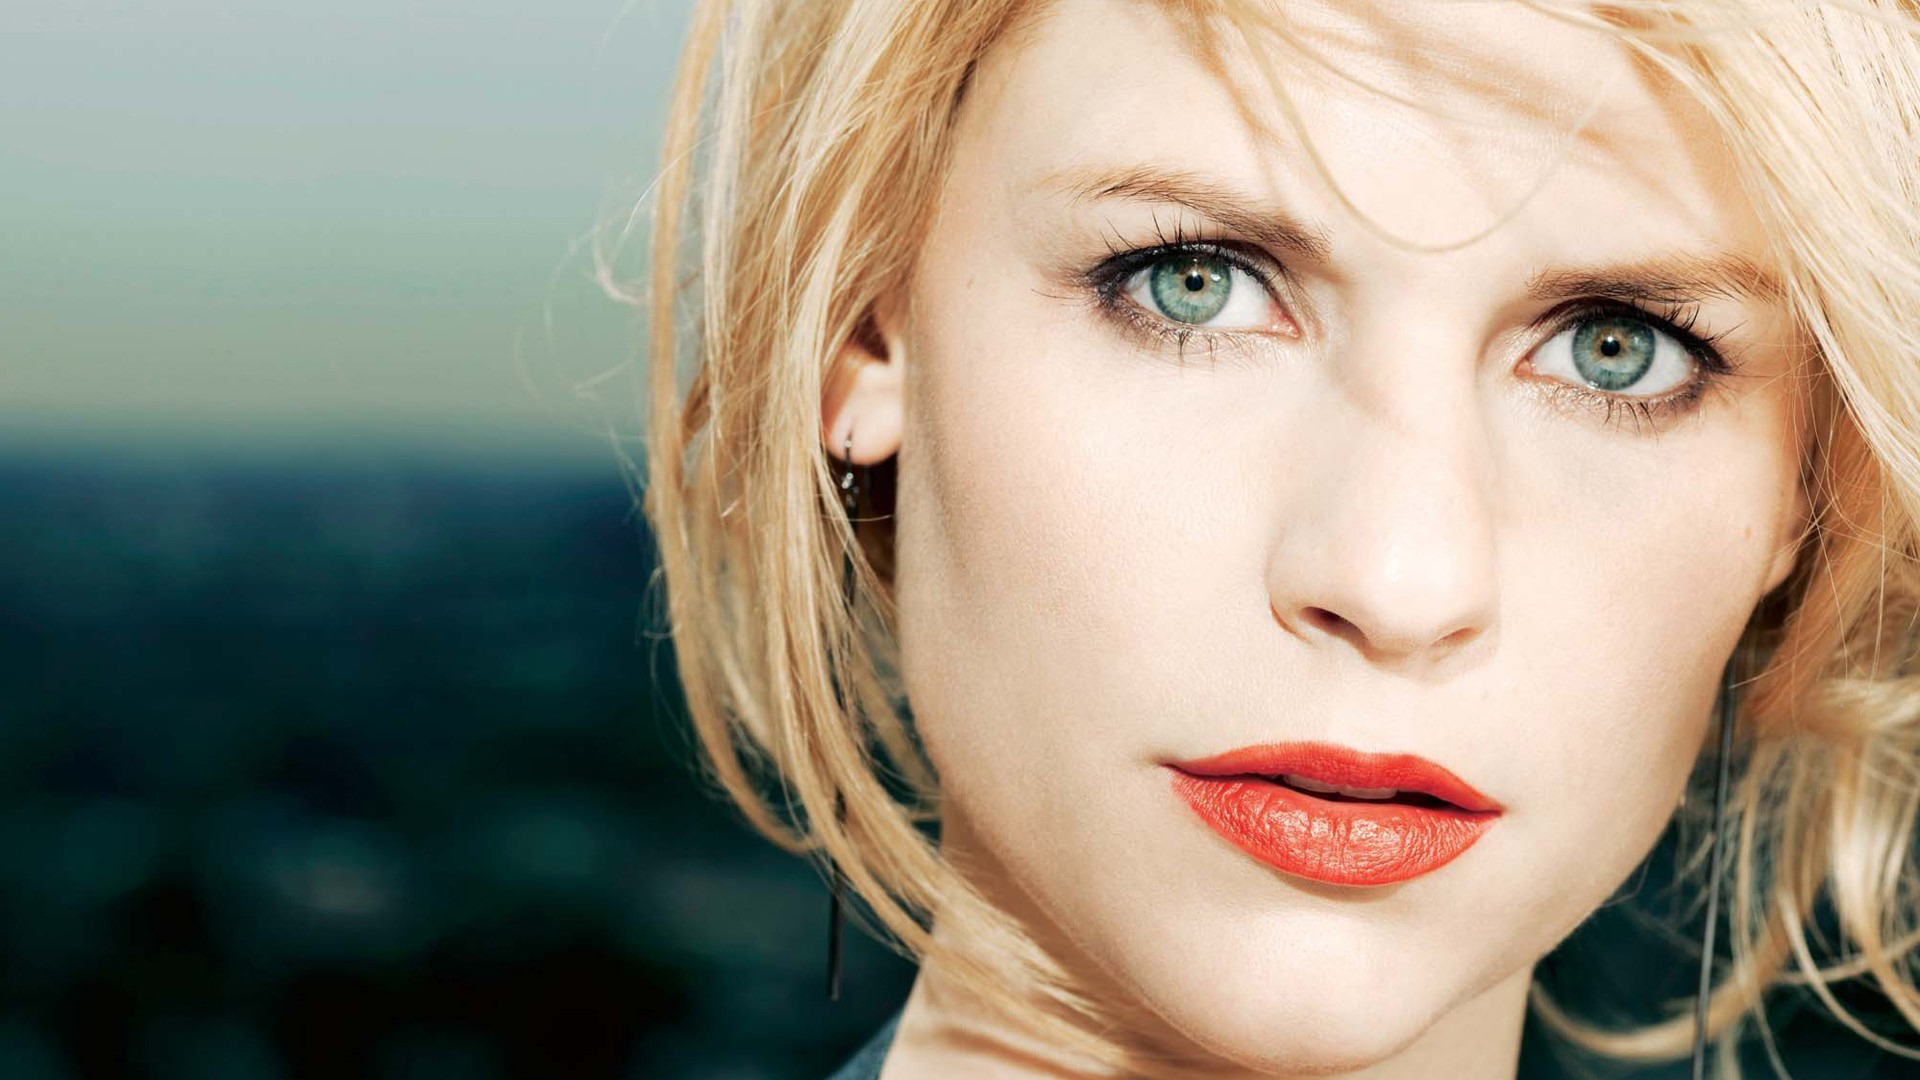 Actress Blonde Blue Eyes Claire Danes 1920x1080